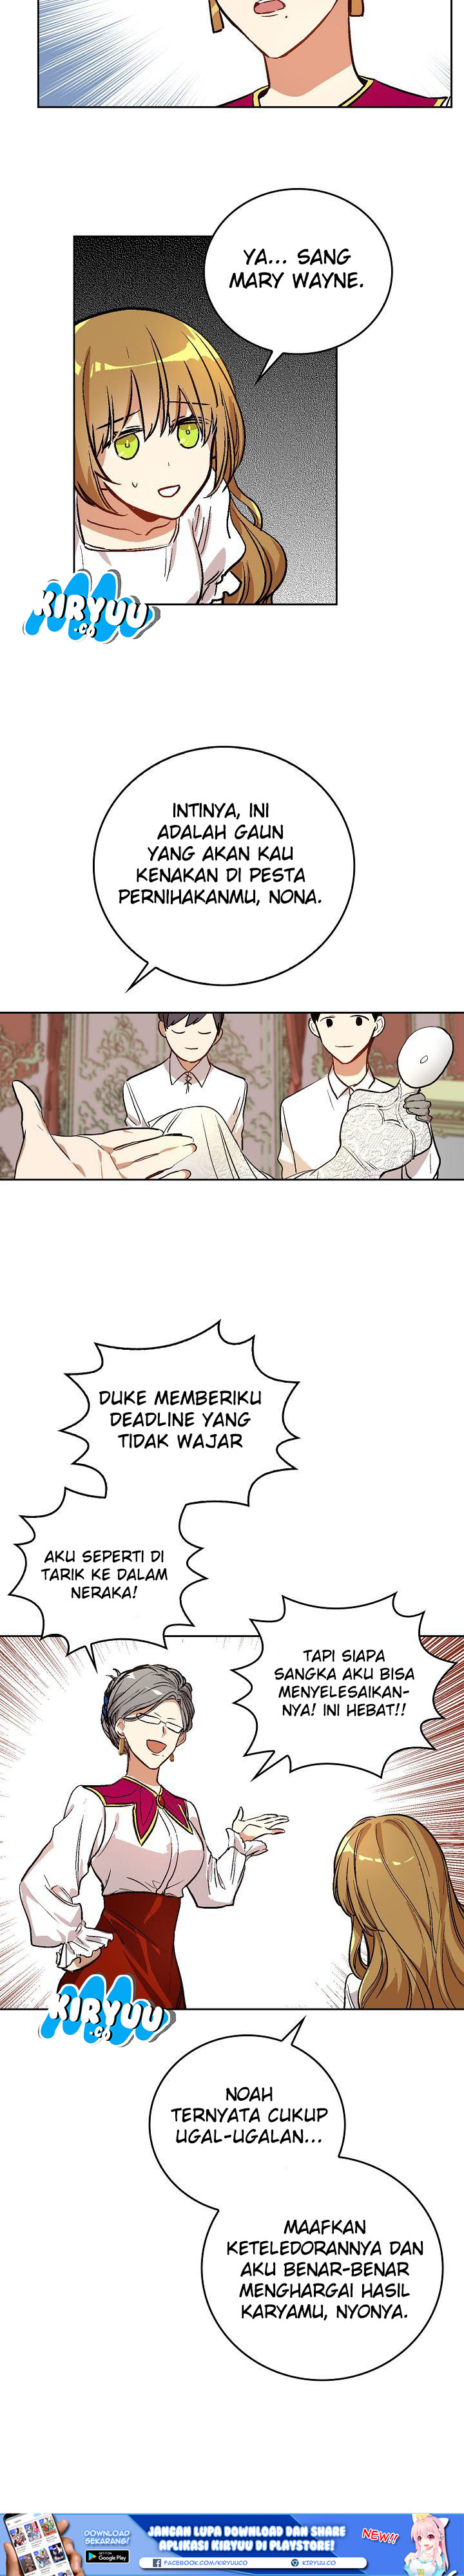 The Reason Why Raeliana Ended up at the Duke’s Mansion Chapter 27